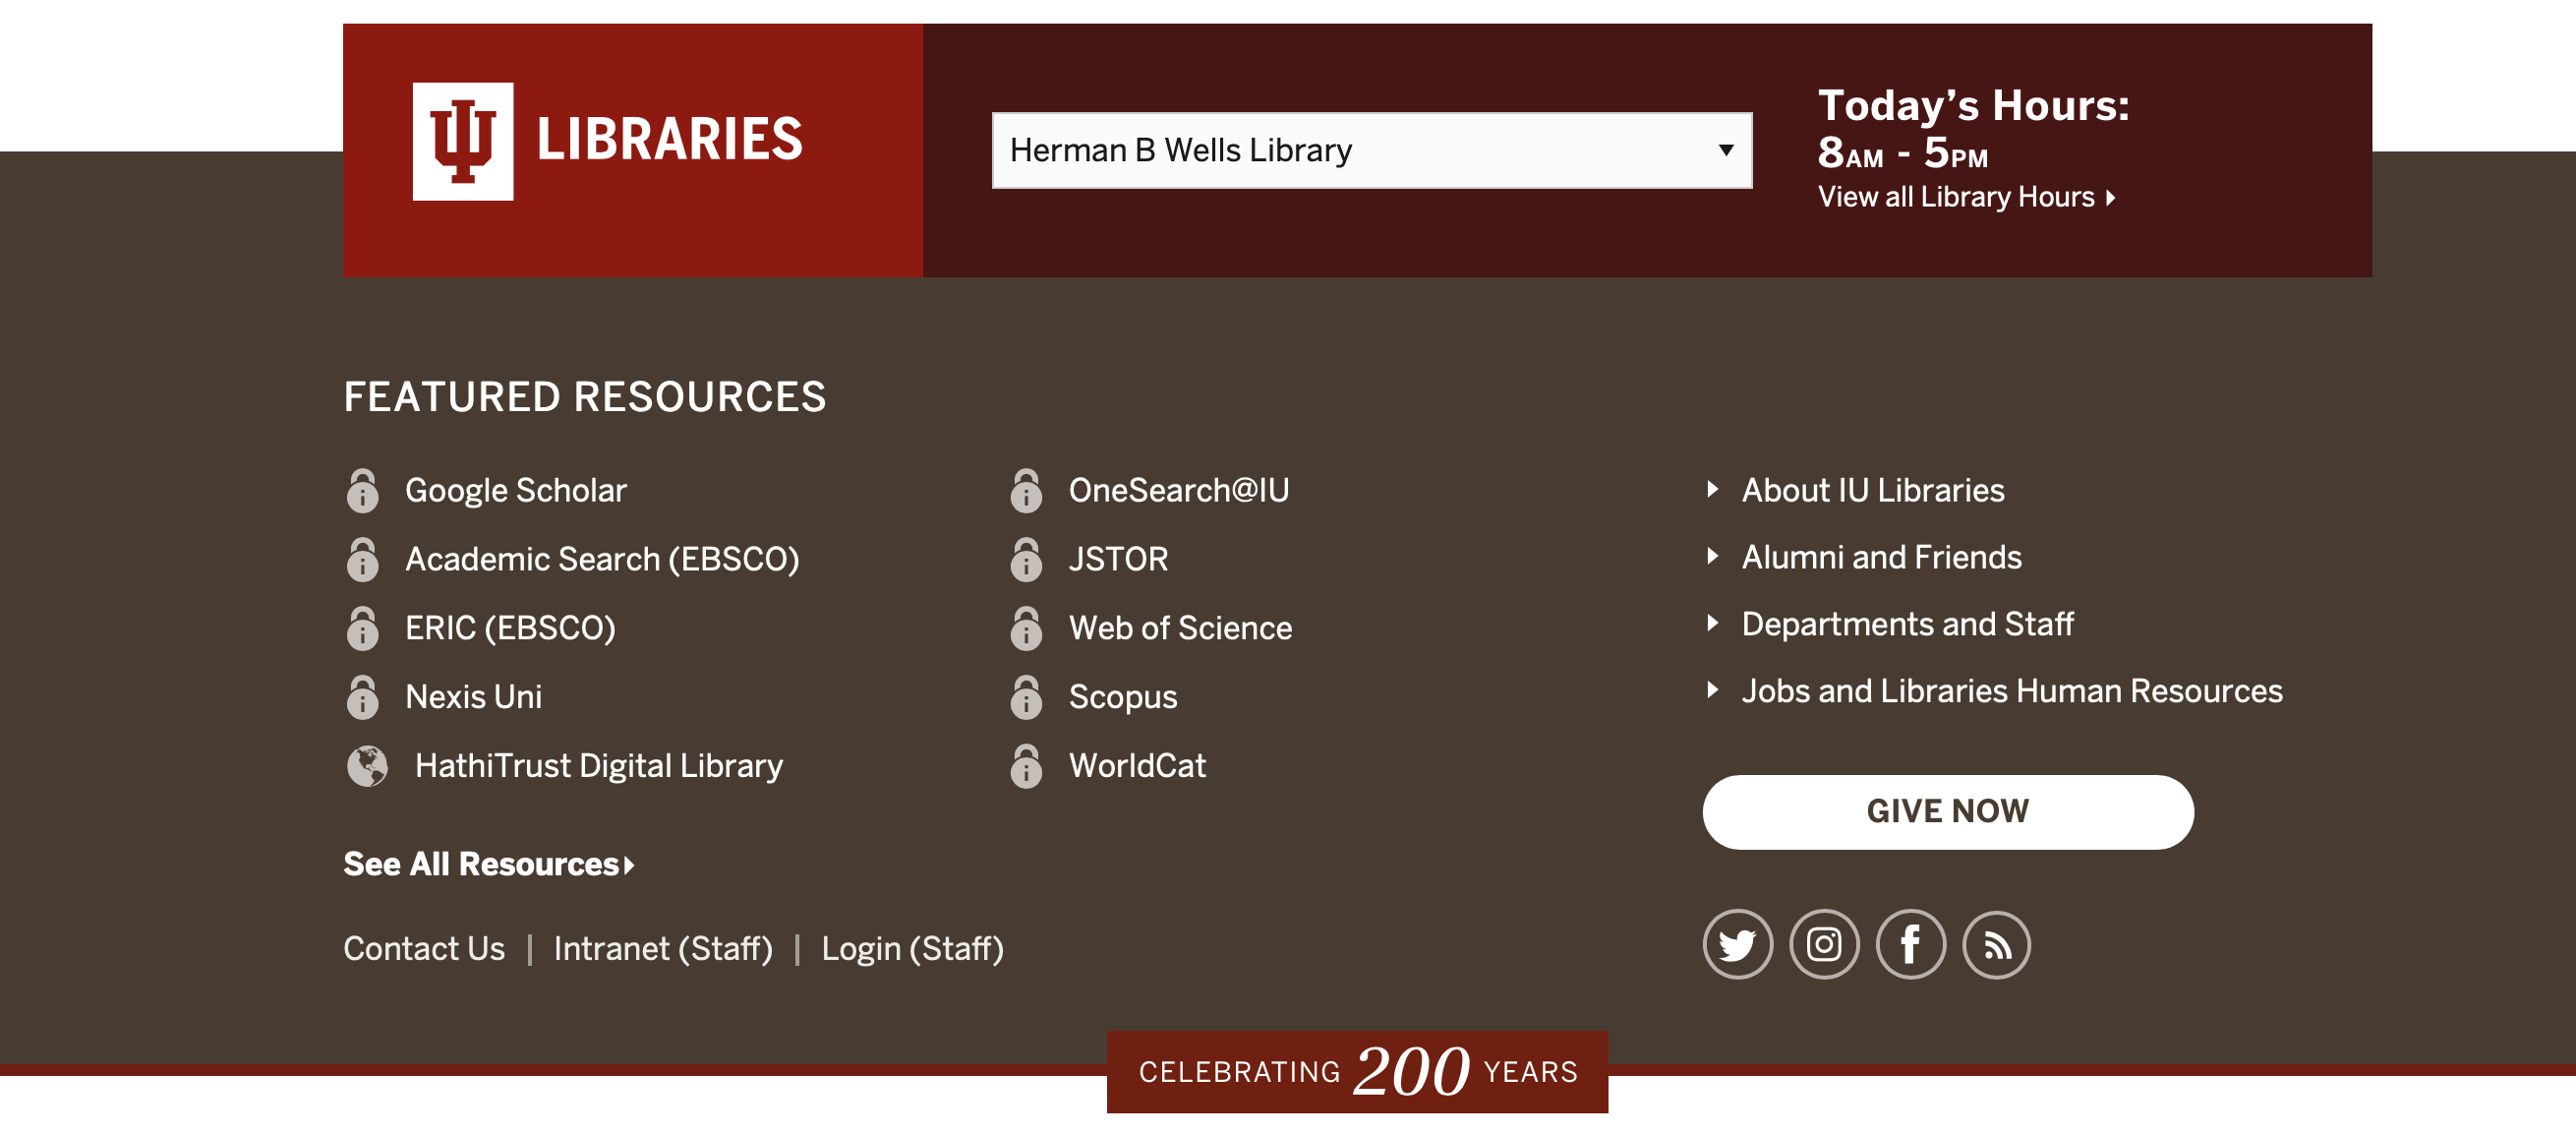 Footer of website showcasing some of our most popular databases